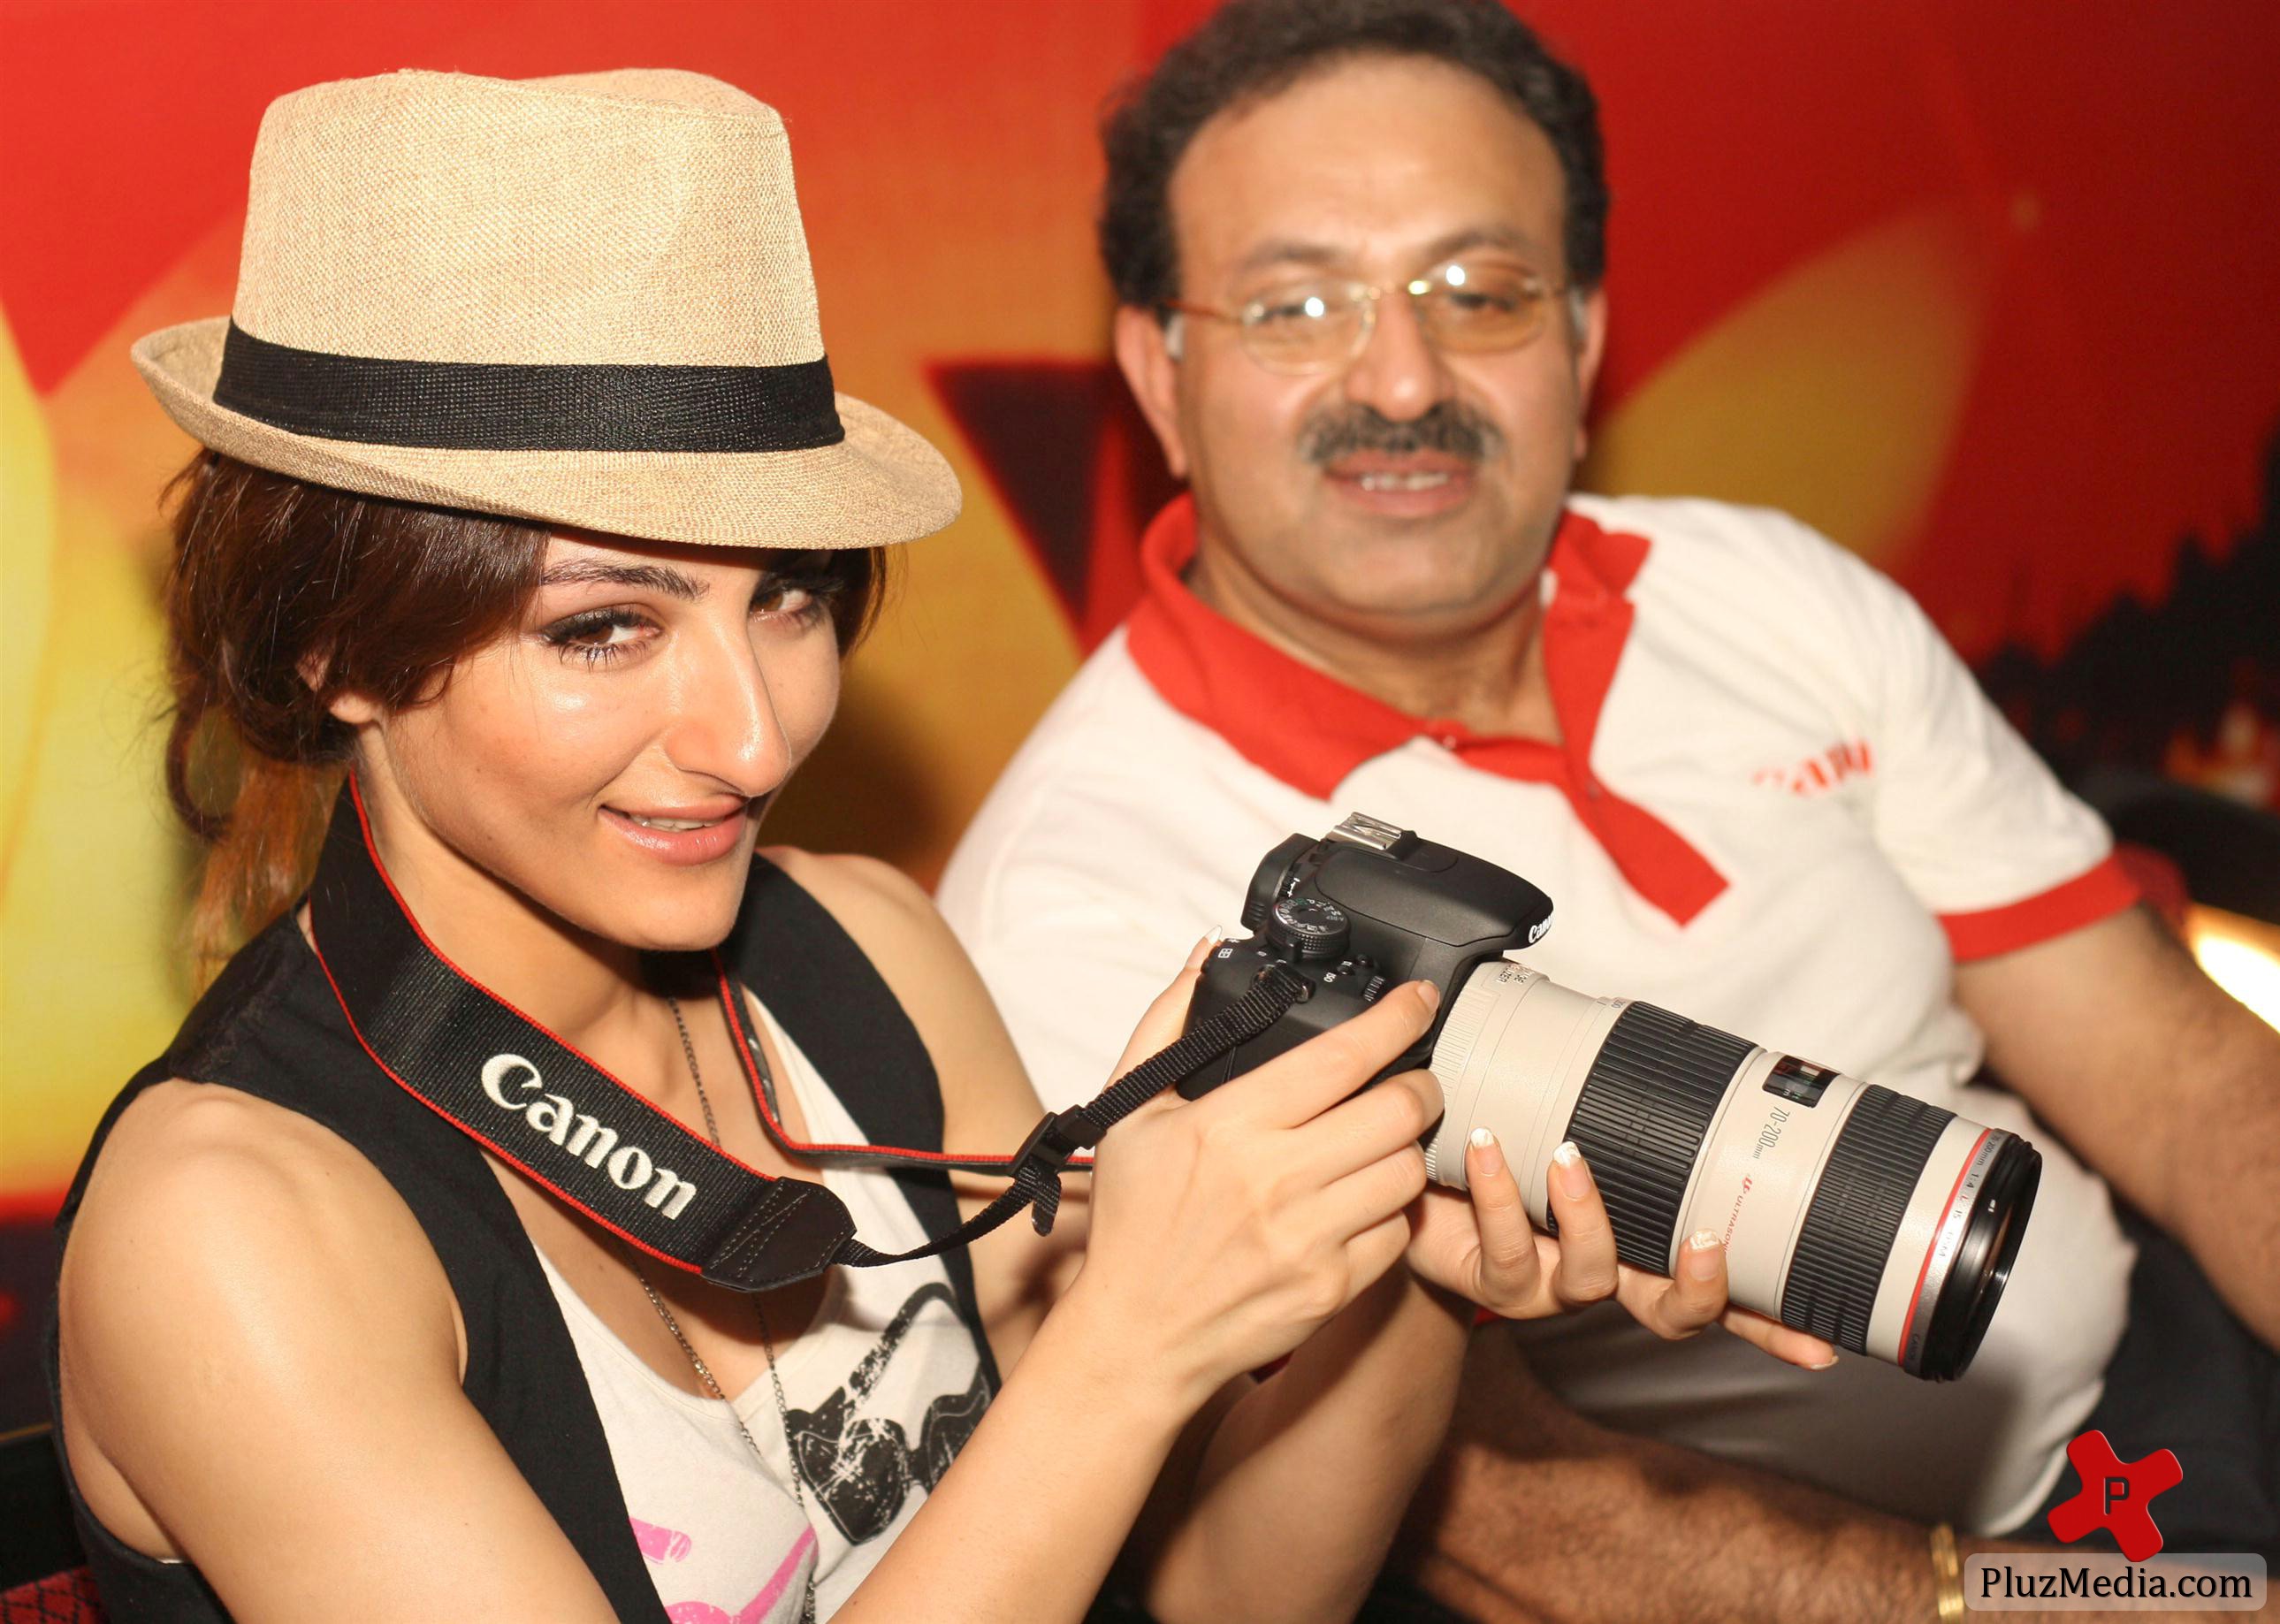 Soha Ali Khan at the 'Canon Photo Marathon' event pictures | Picture 81601